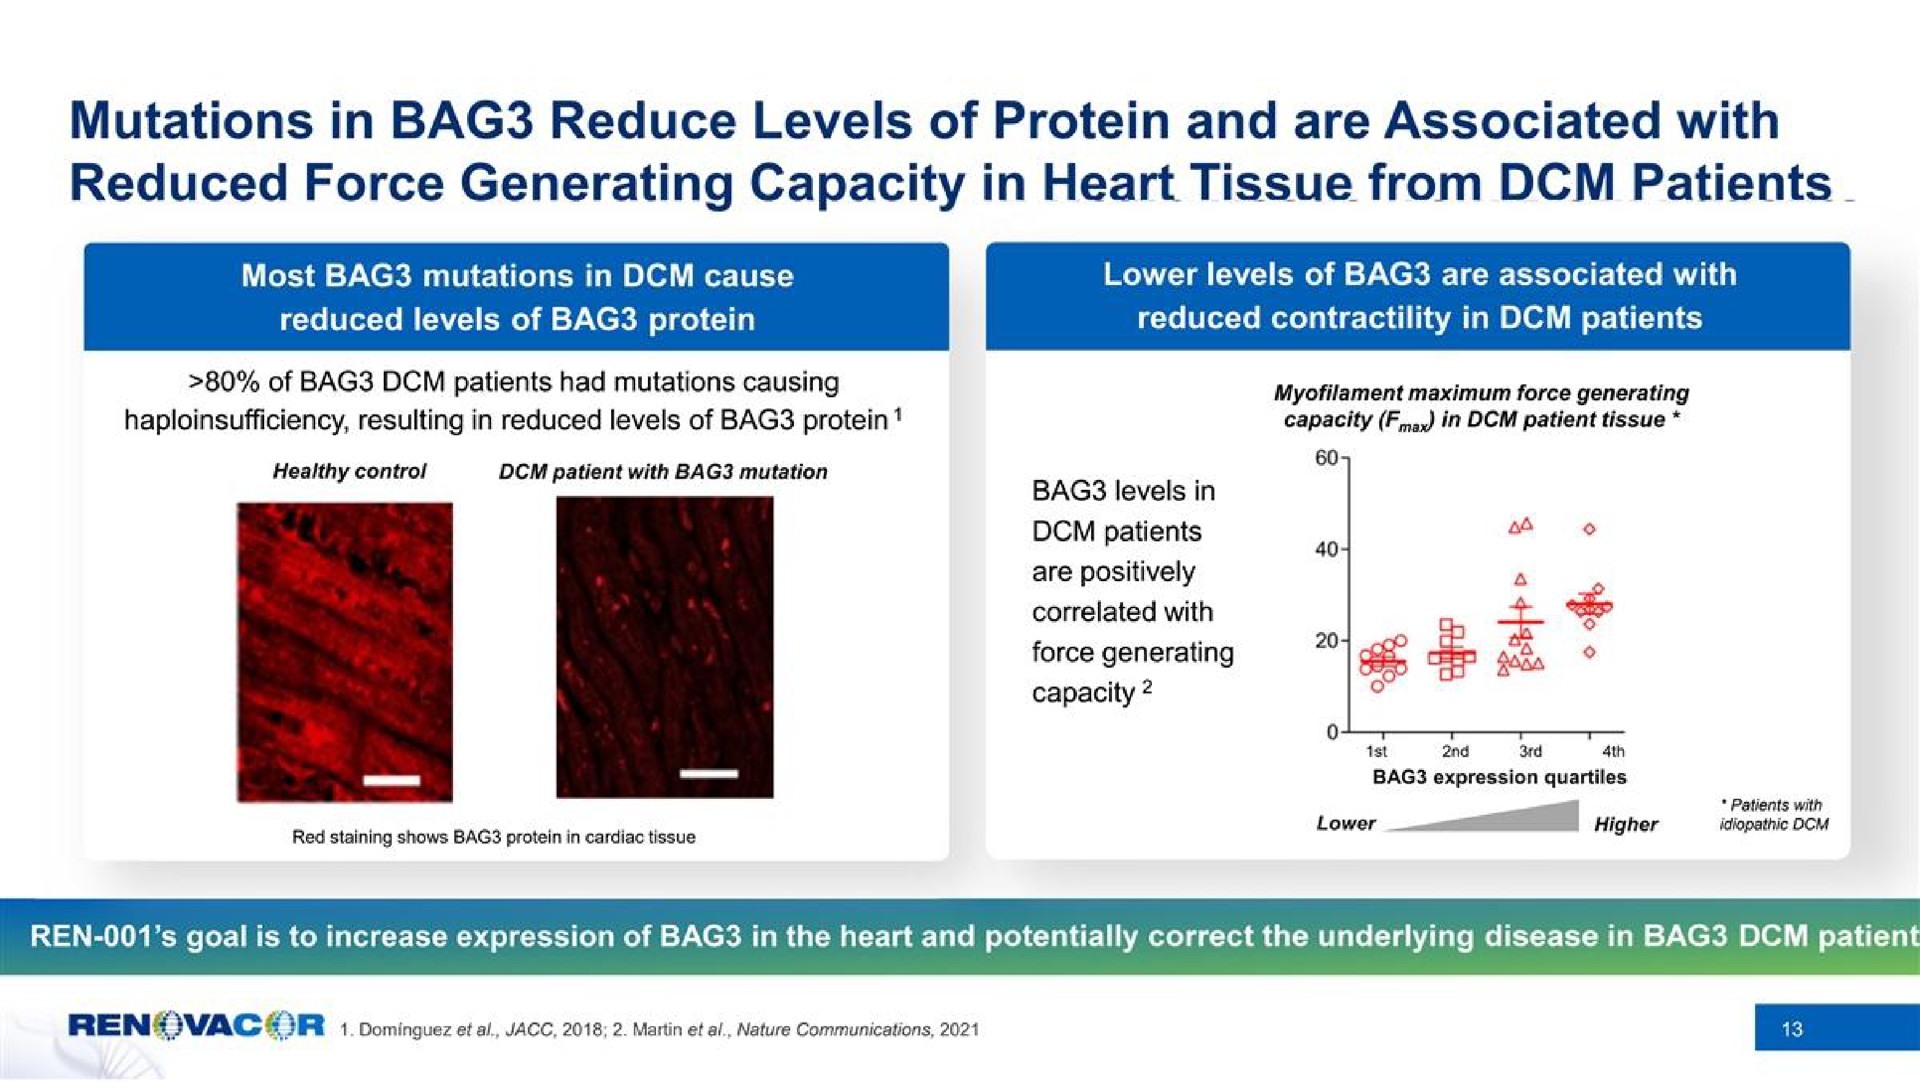 mutations in bag reduce levels of protein and are associated with reduced force generating capacity in heart tissue from patients | Renovacor